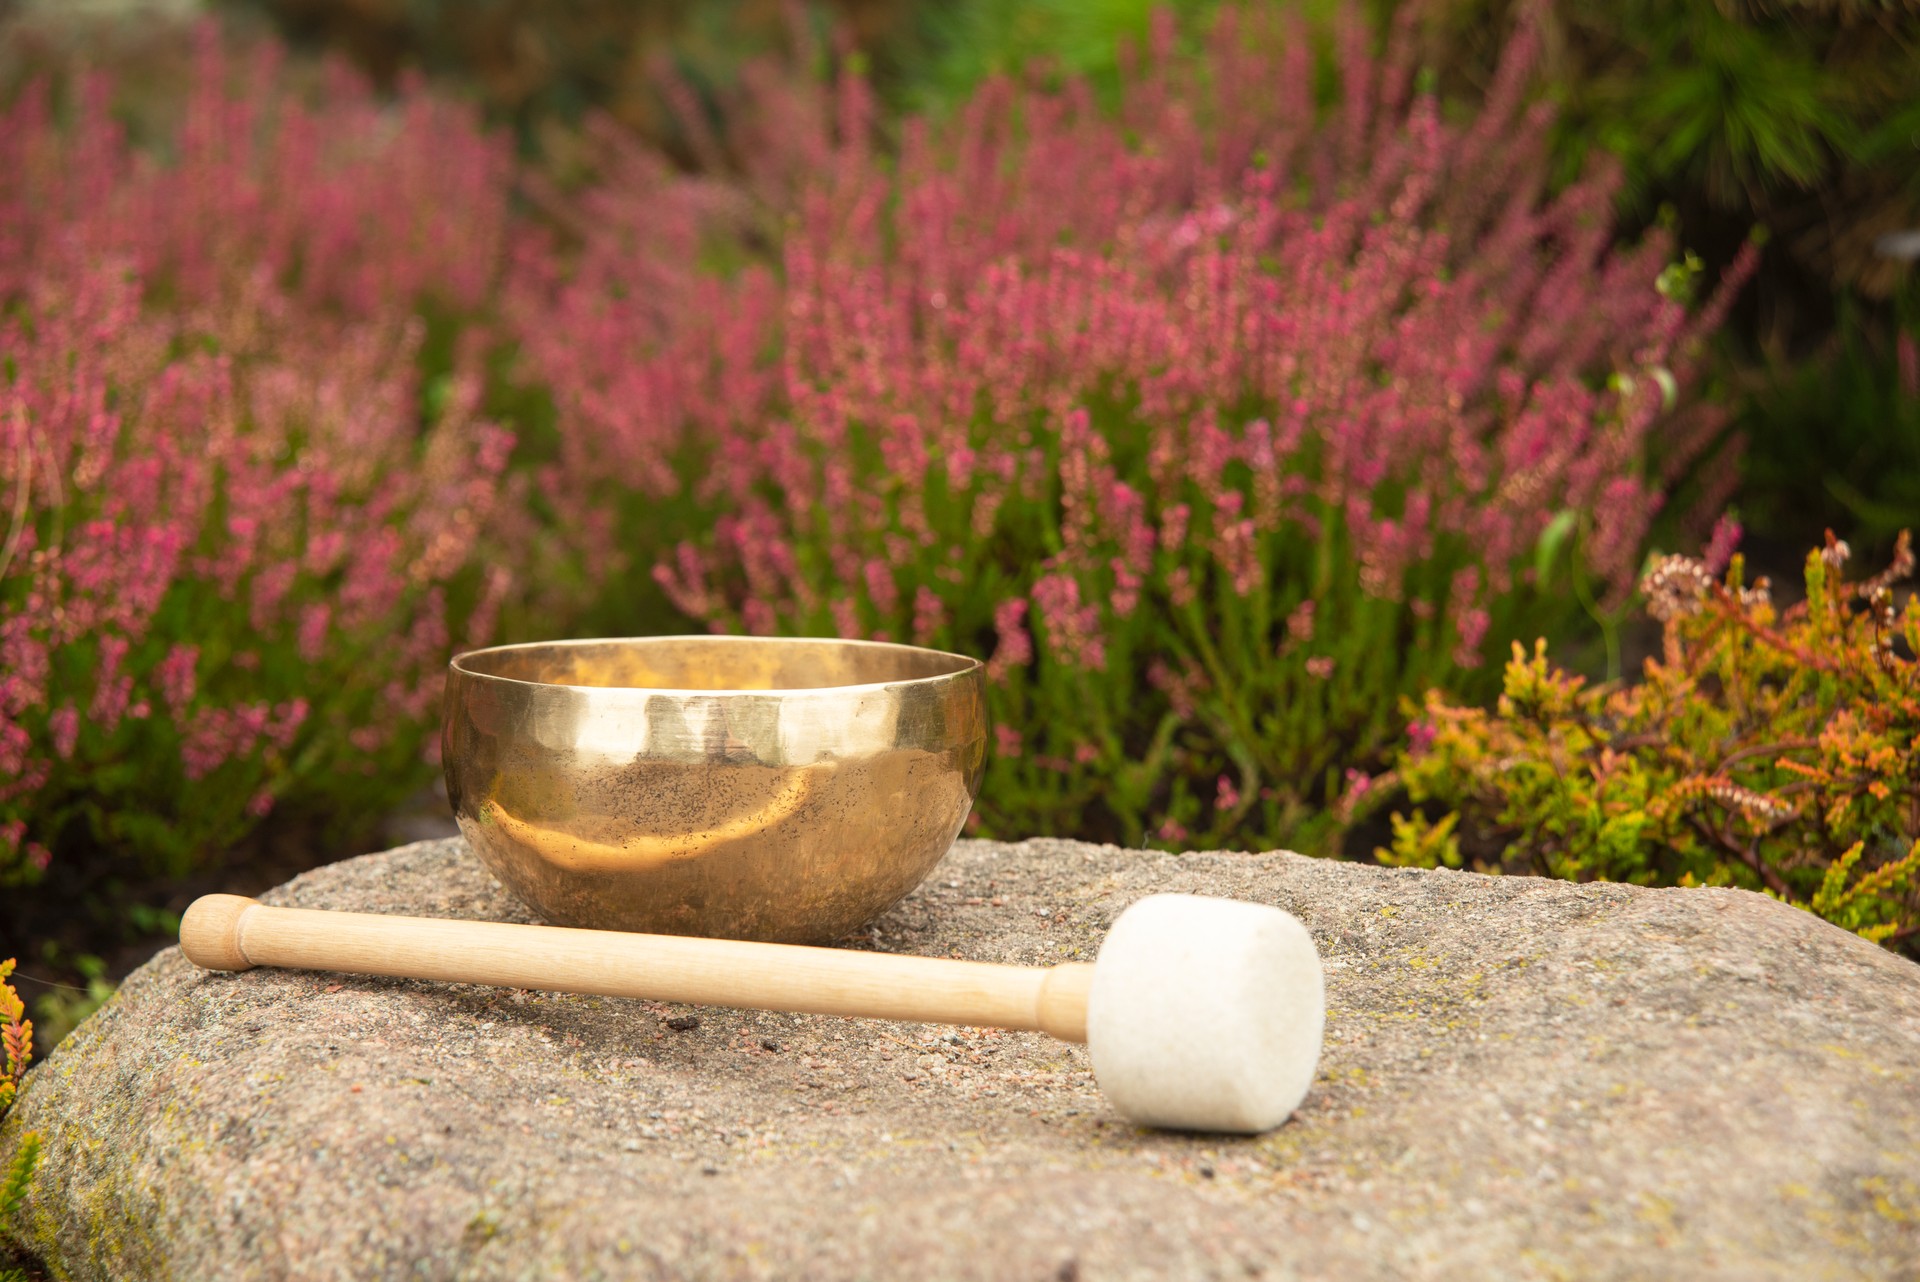 The golden singing bowl stands on the Big Stone at the entrance of landscape with the bright colors of heather. The tibetan singing bowl with a long stick for sounding on meditation or yoga practice.